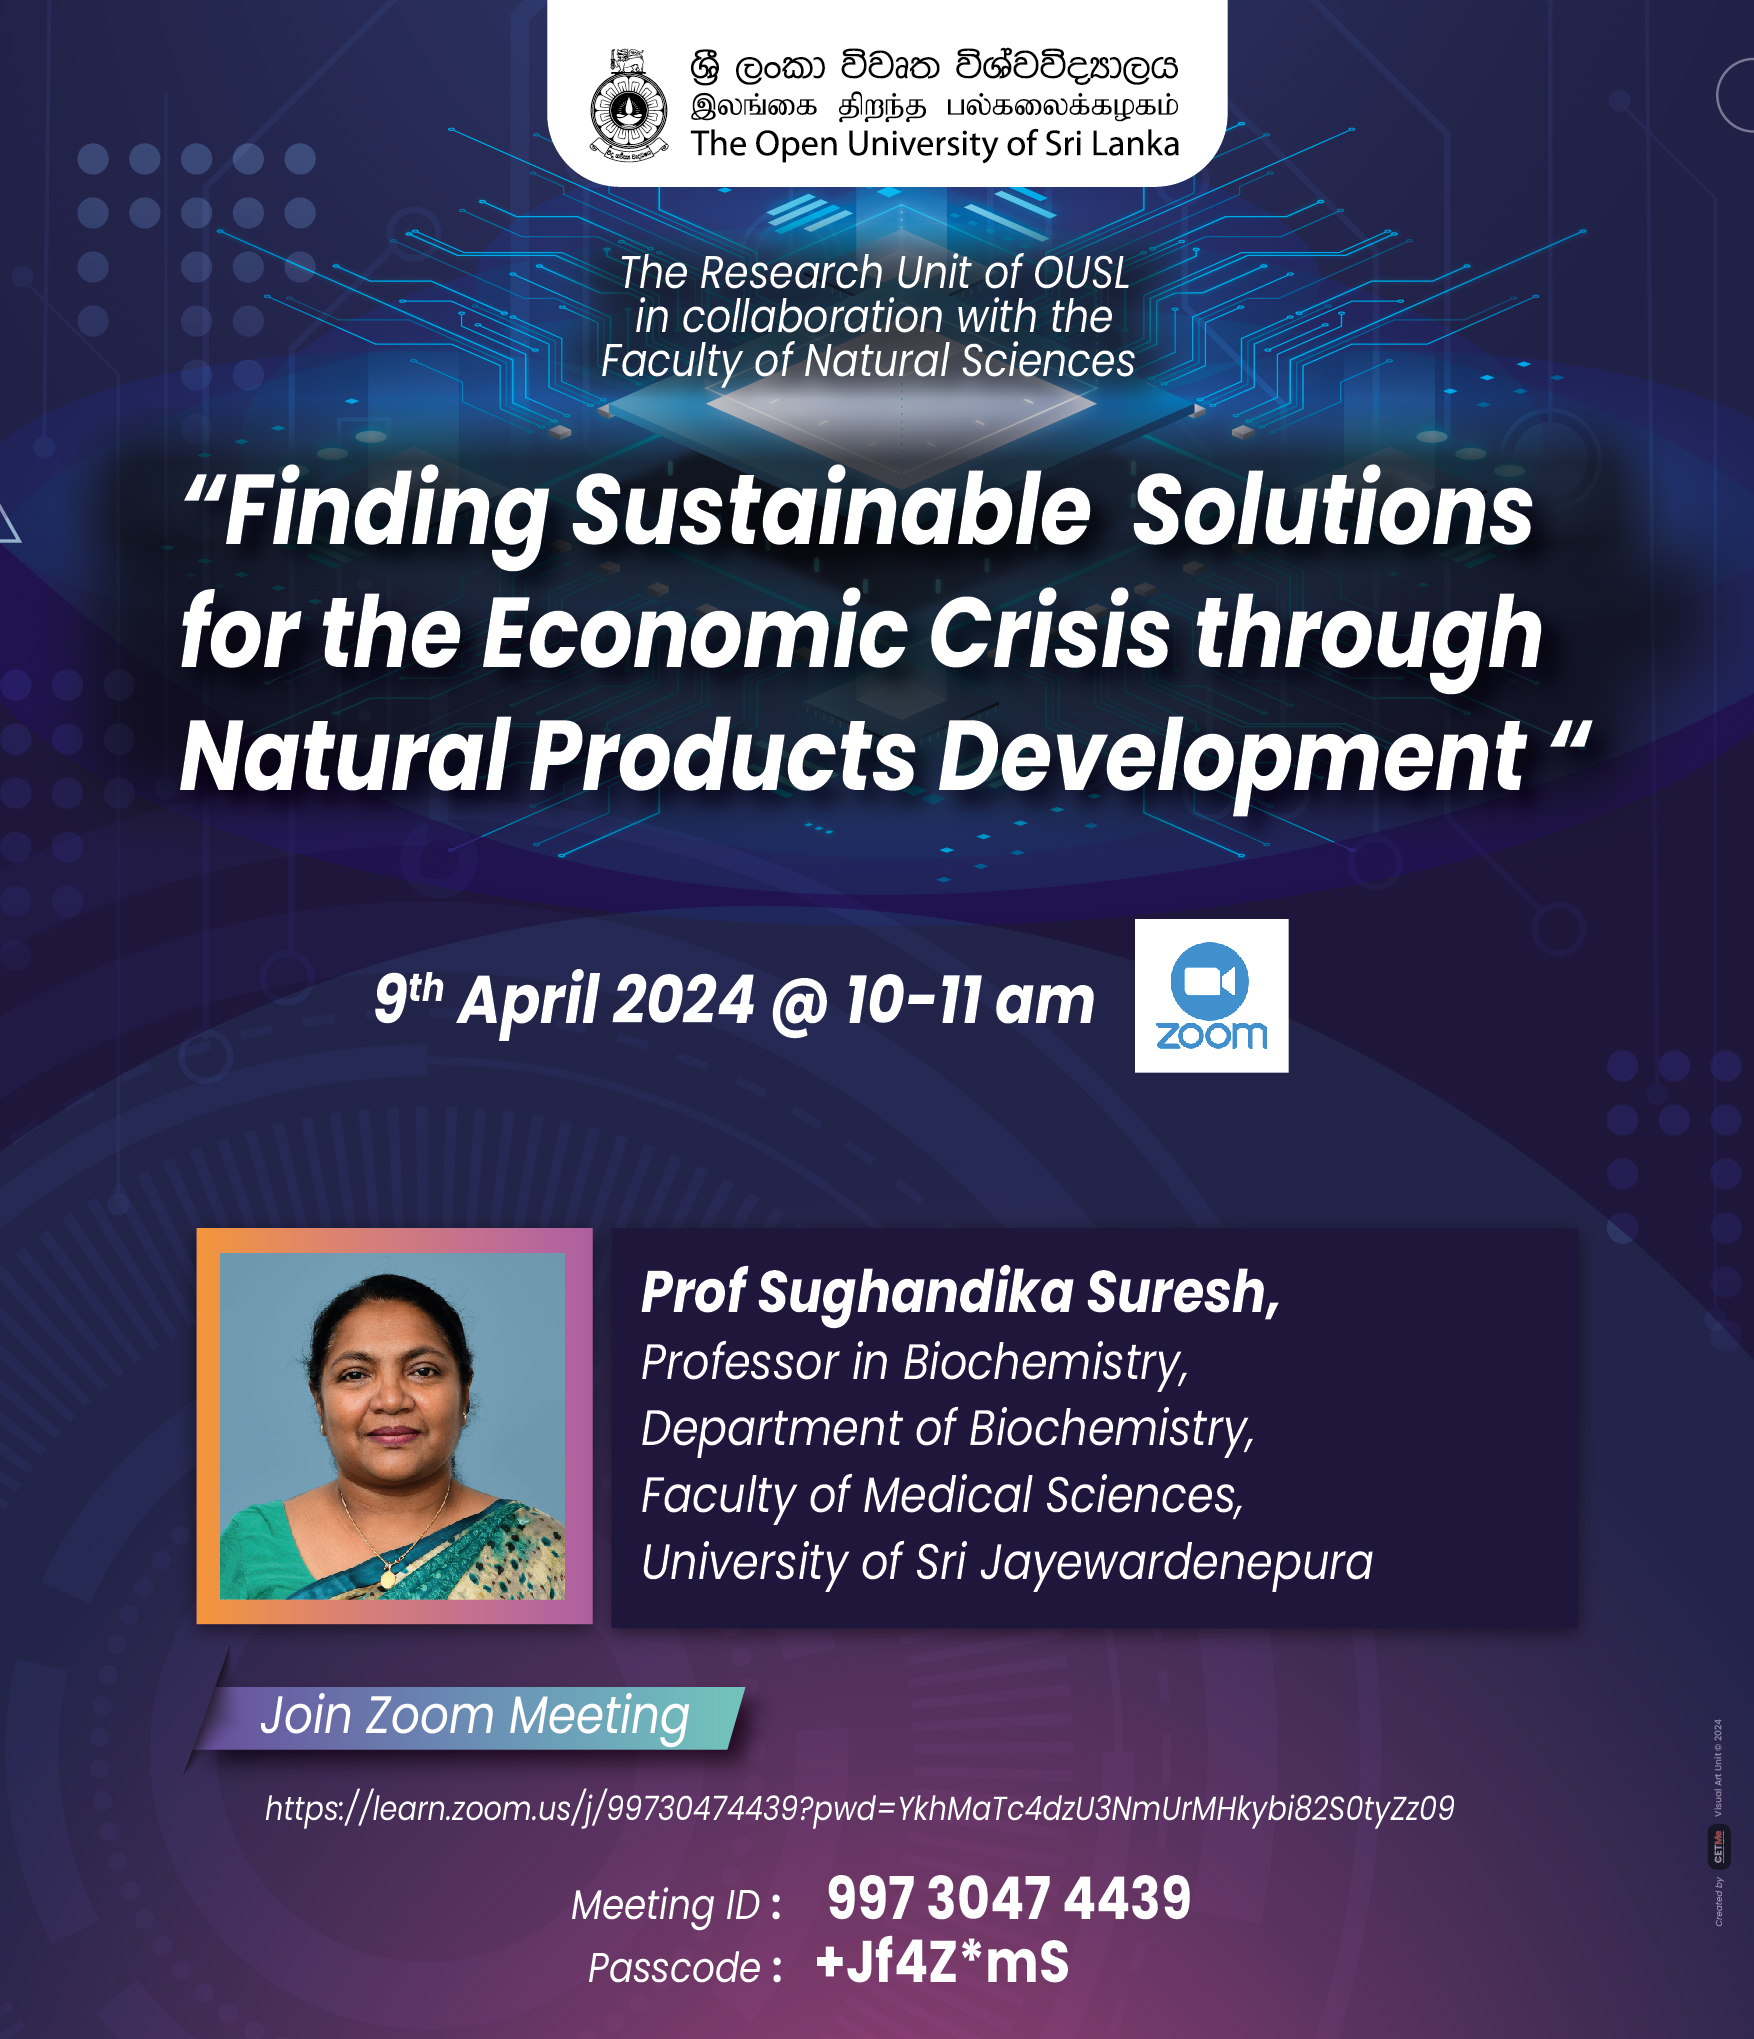 Finding Sustainable Solutions for the Economic Crisis through Natural Products Development